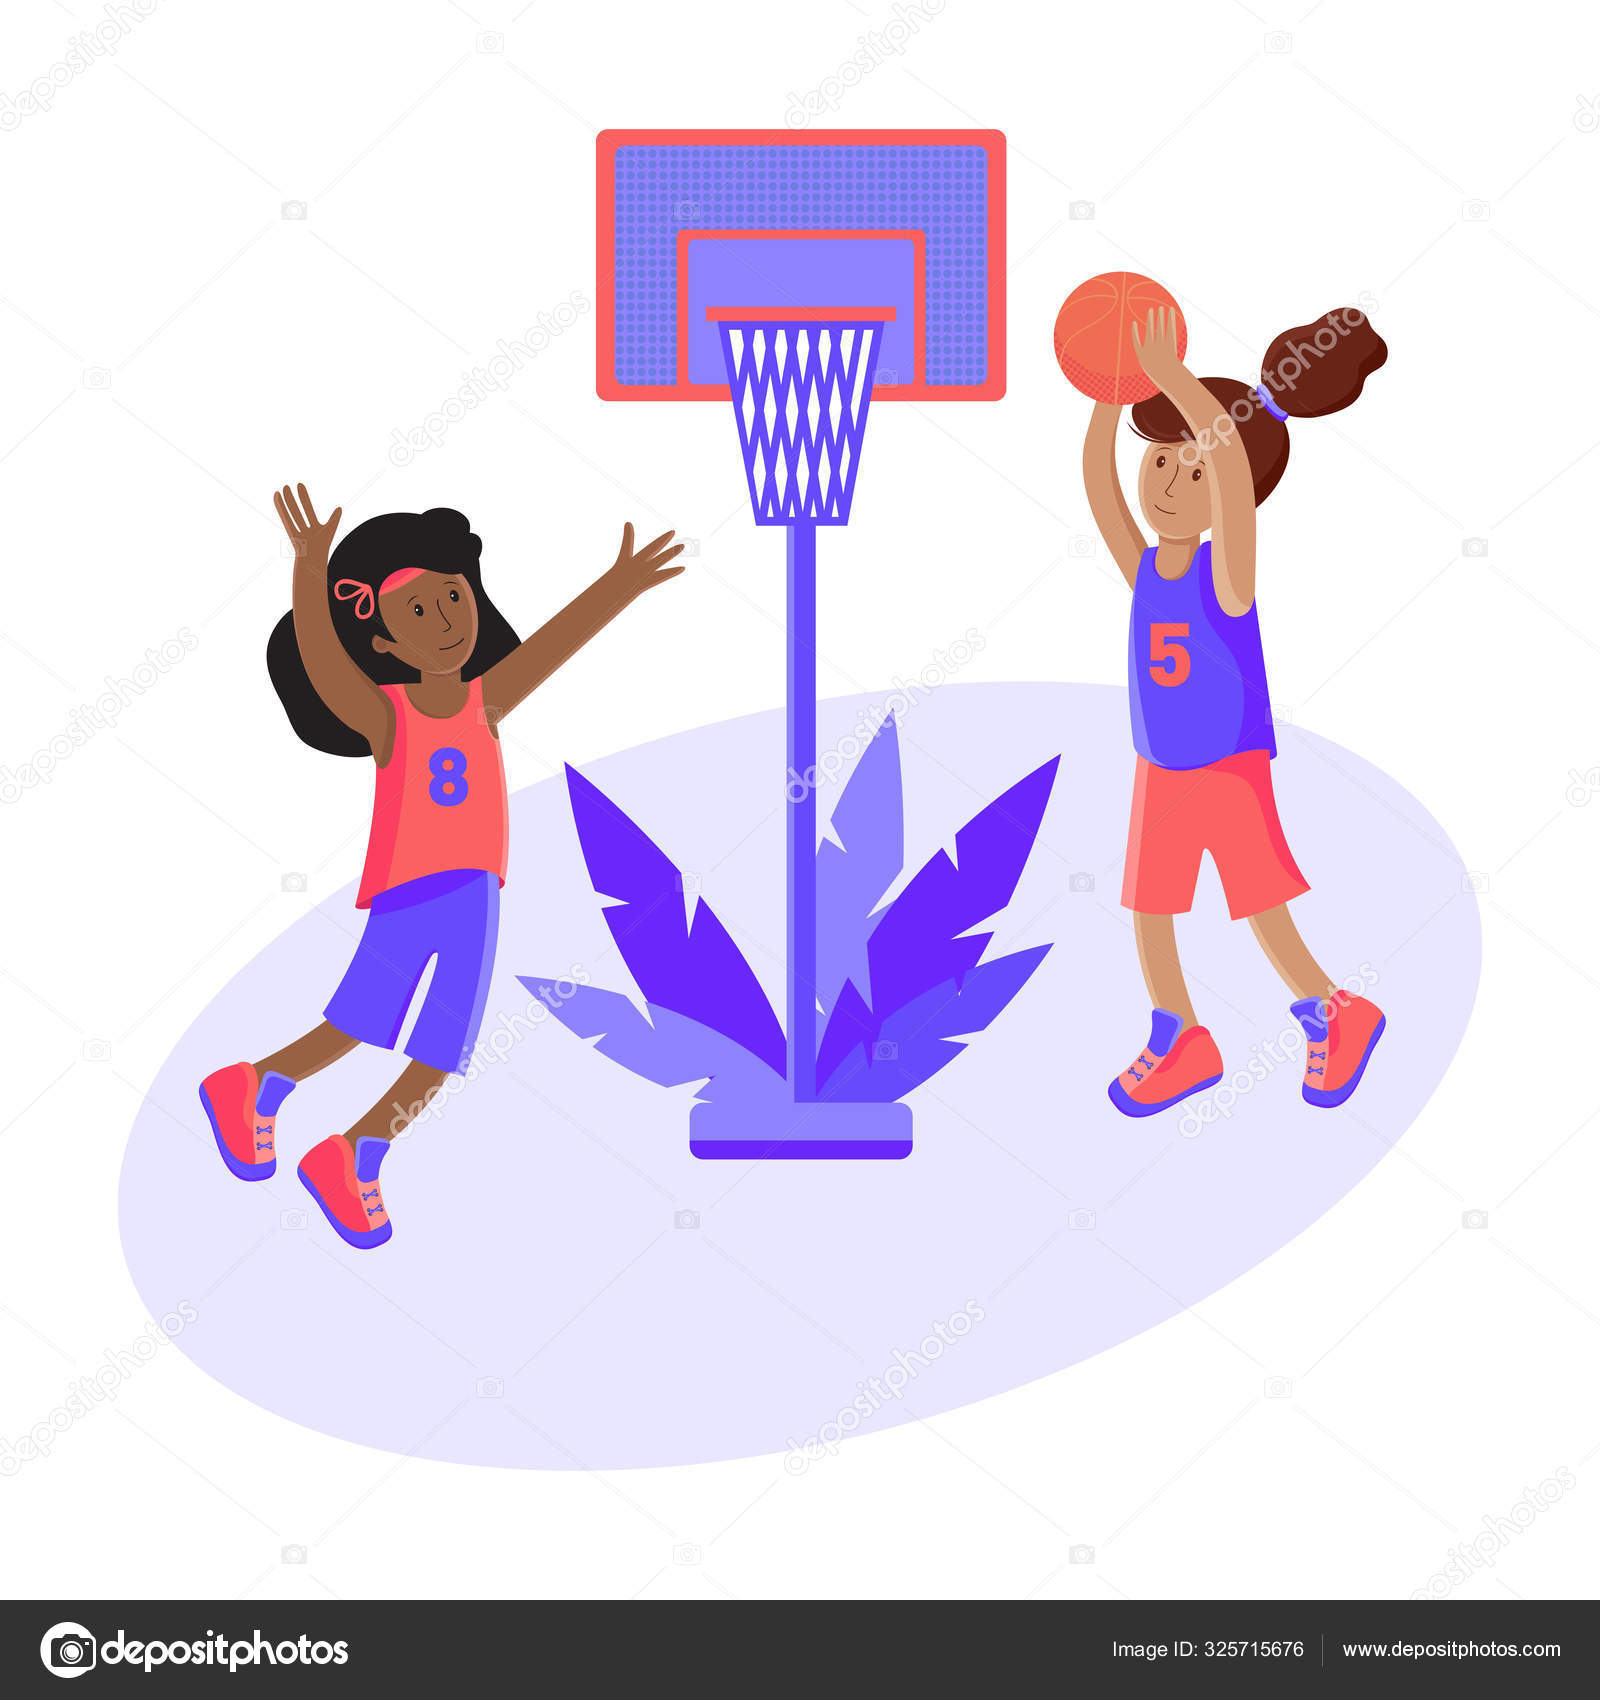 Girls play basketball with a ball. Colorful cartoon illustration